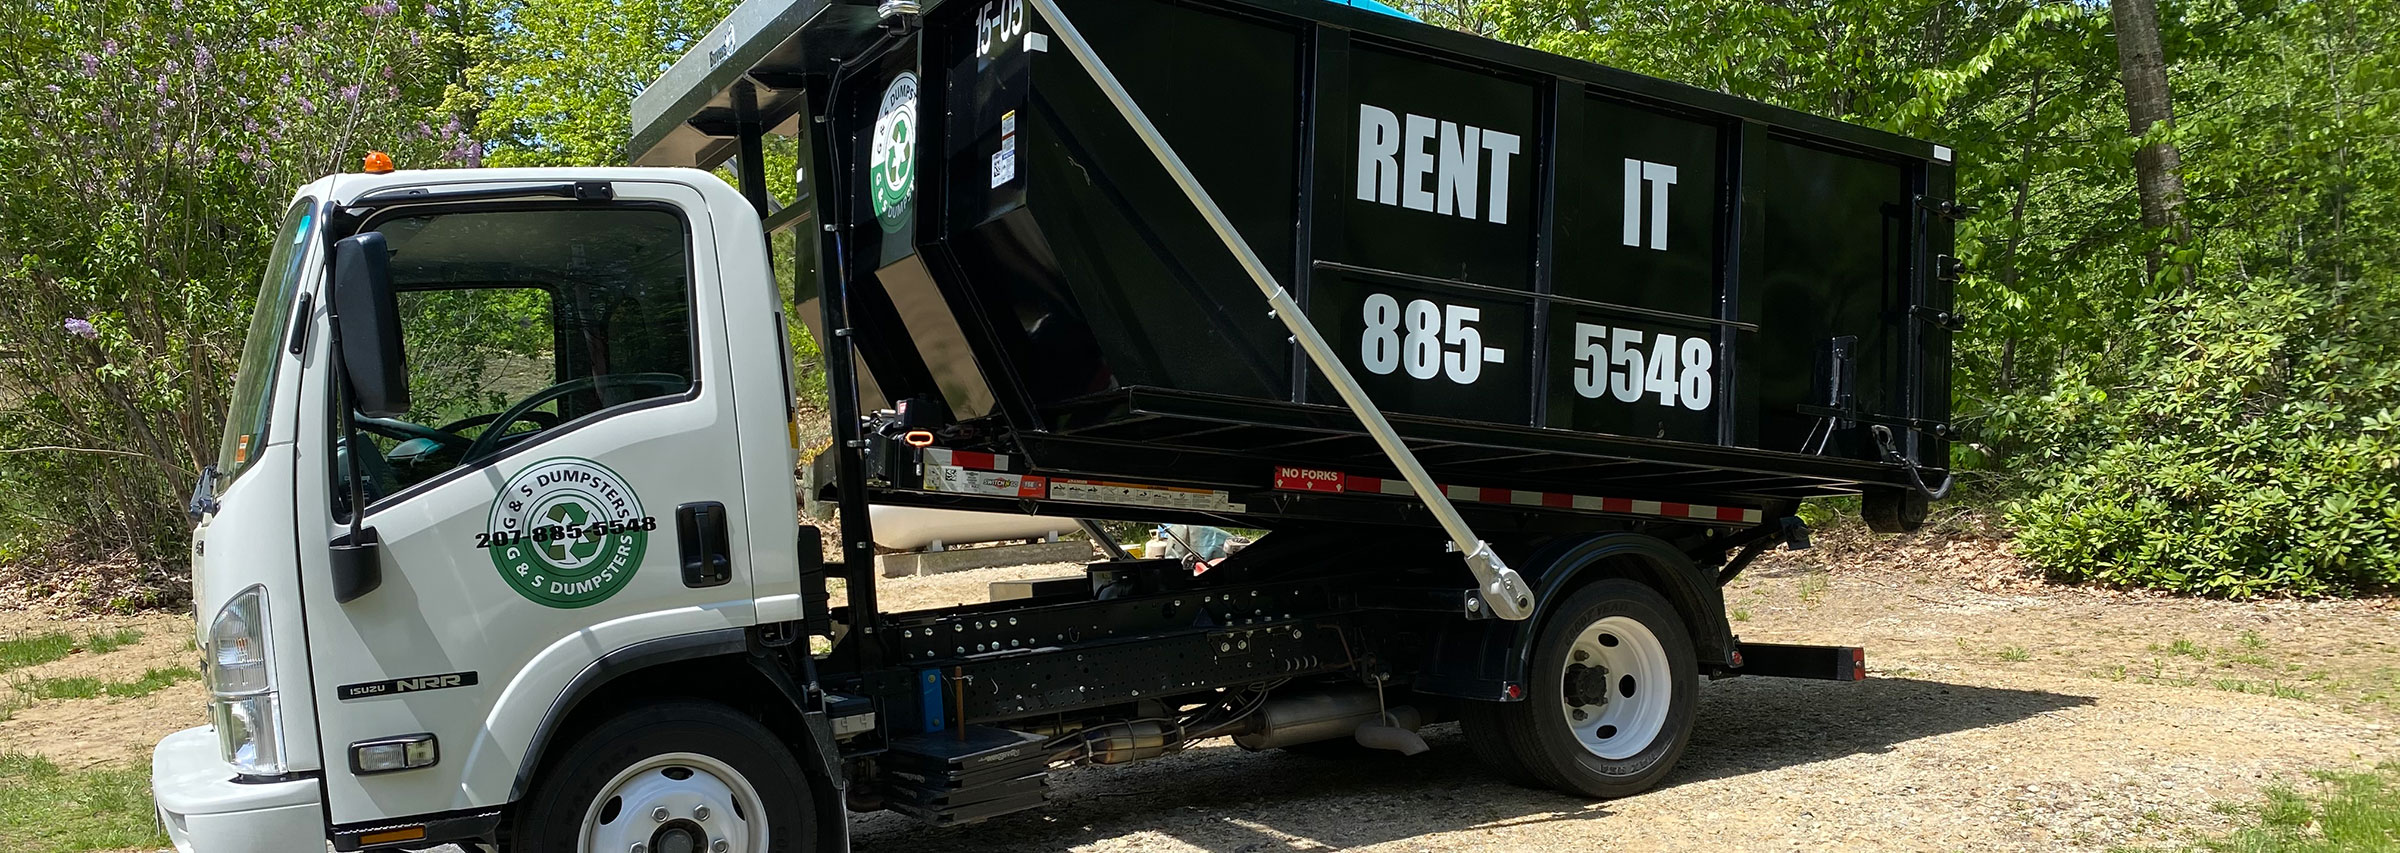 dumpster being picked up